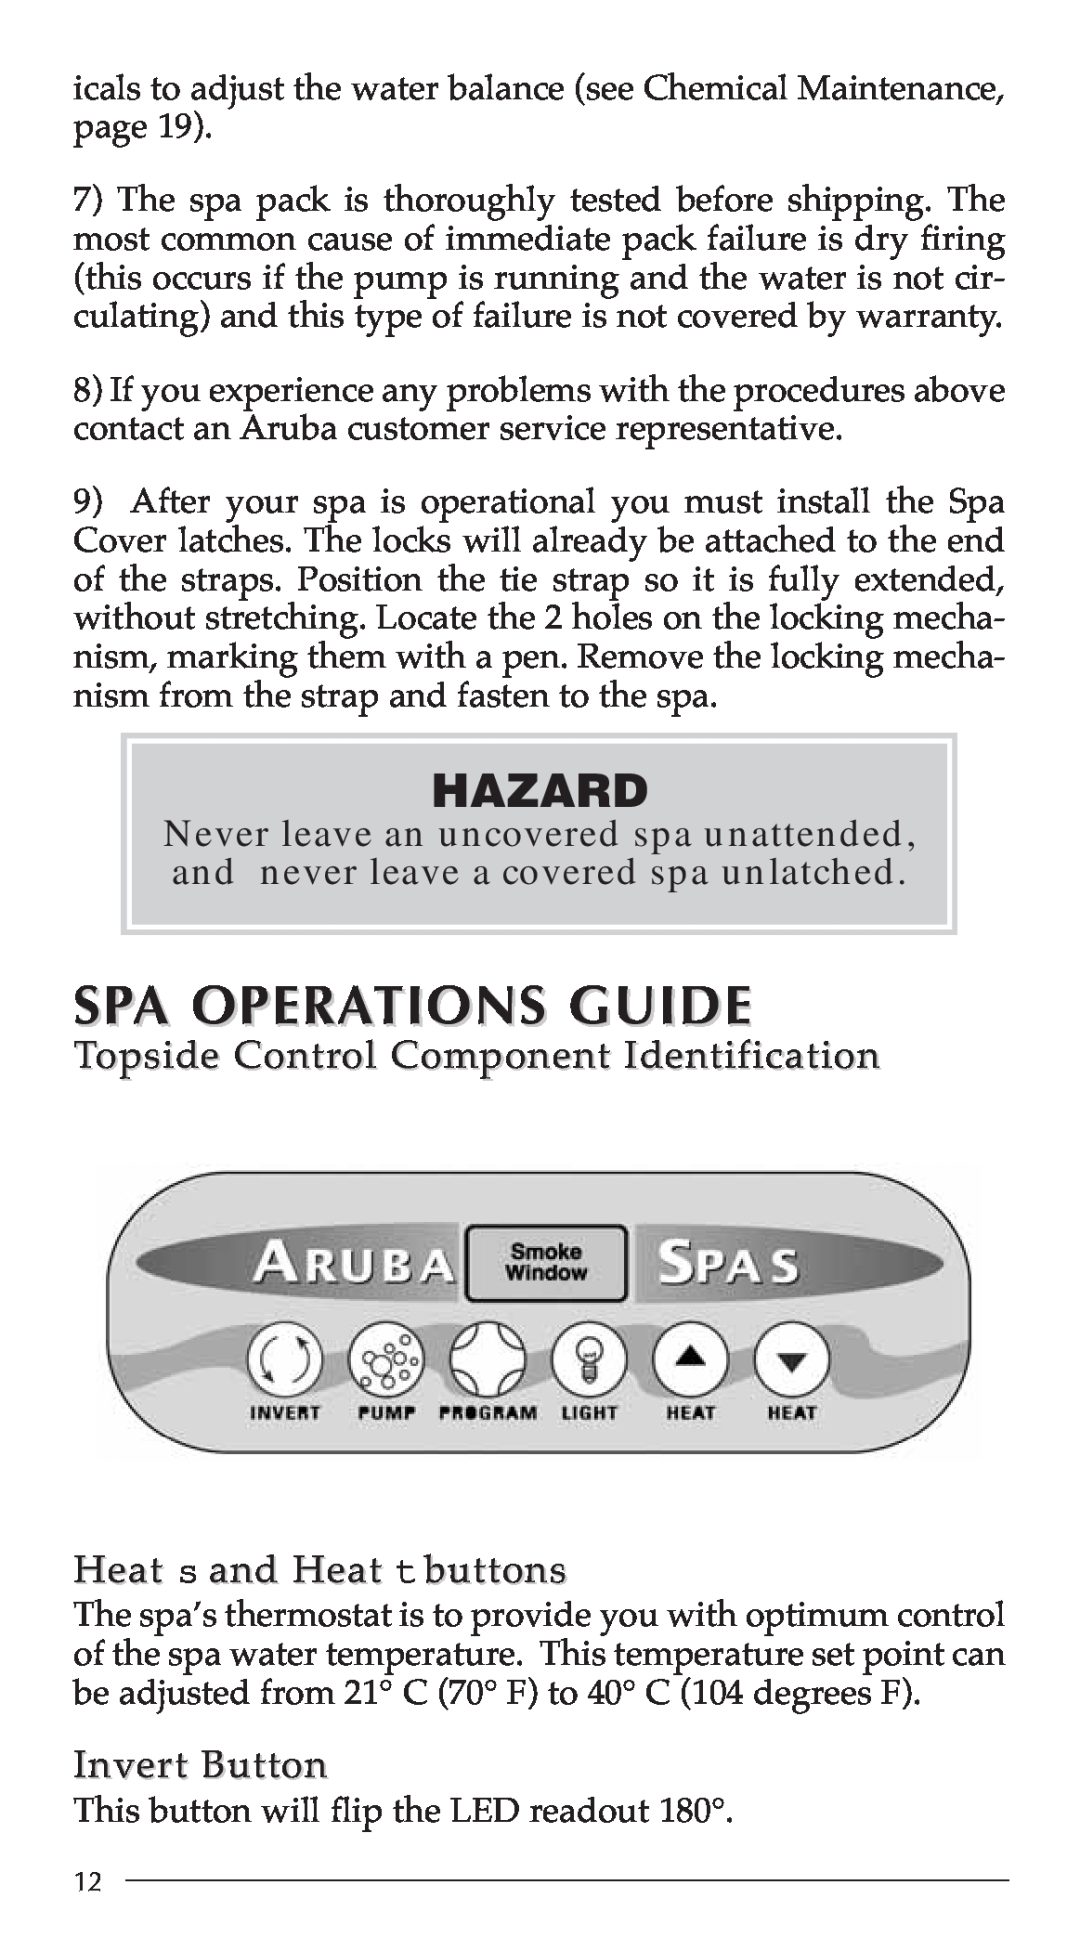 Aruba Spa 2003 Serenade Spa Operations Guide, Hazard, Topside Control Component Identification, Heat s and Heat t buttons 